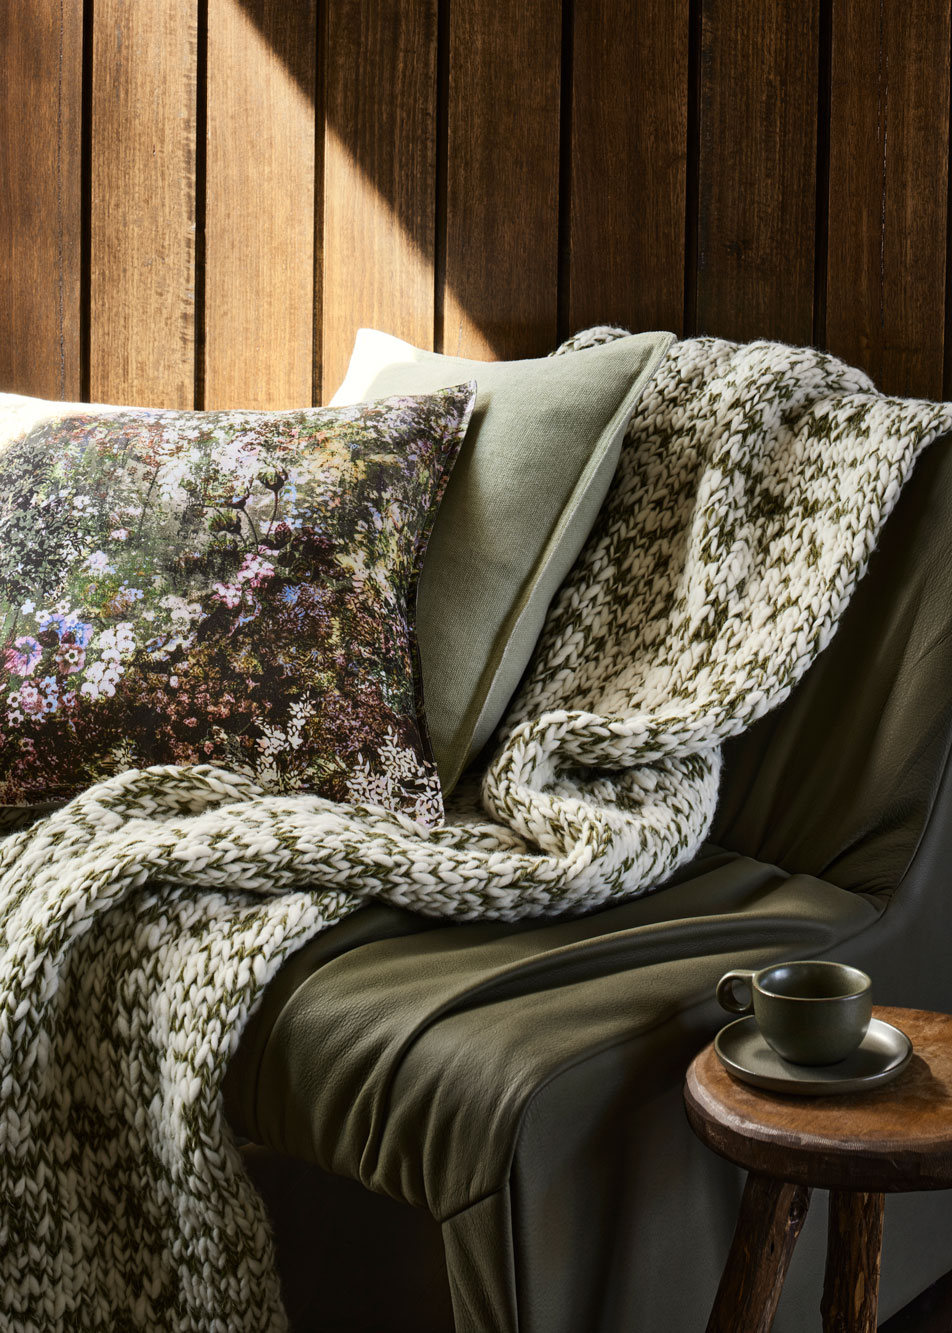 A green and white knit throw sits on top of a deep green leather chair, next to a timber side table. Multicoloured cushions are scattered around.